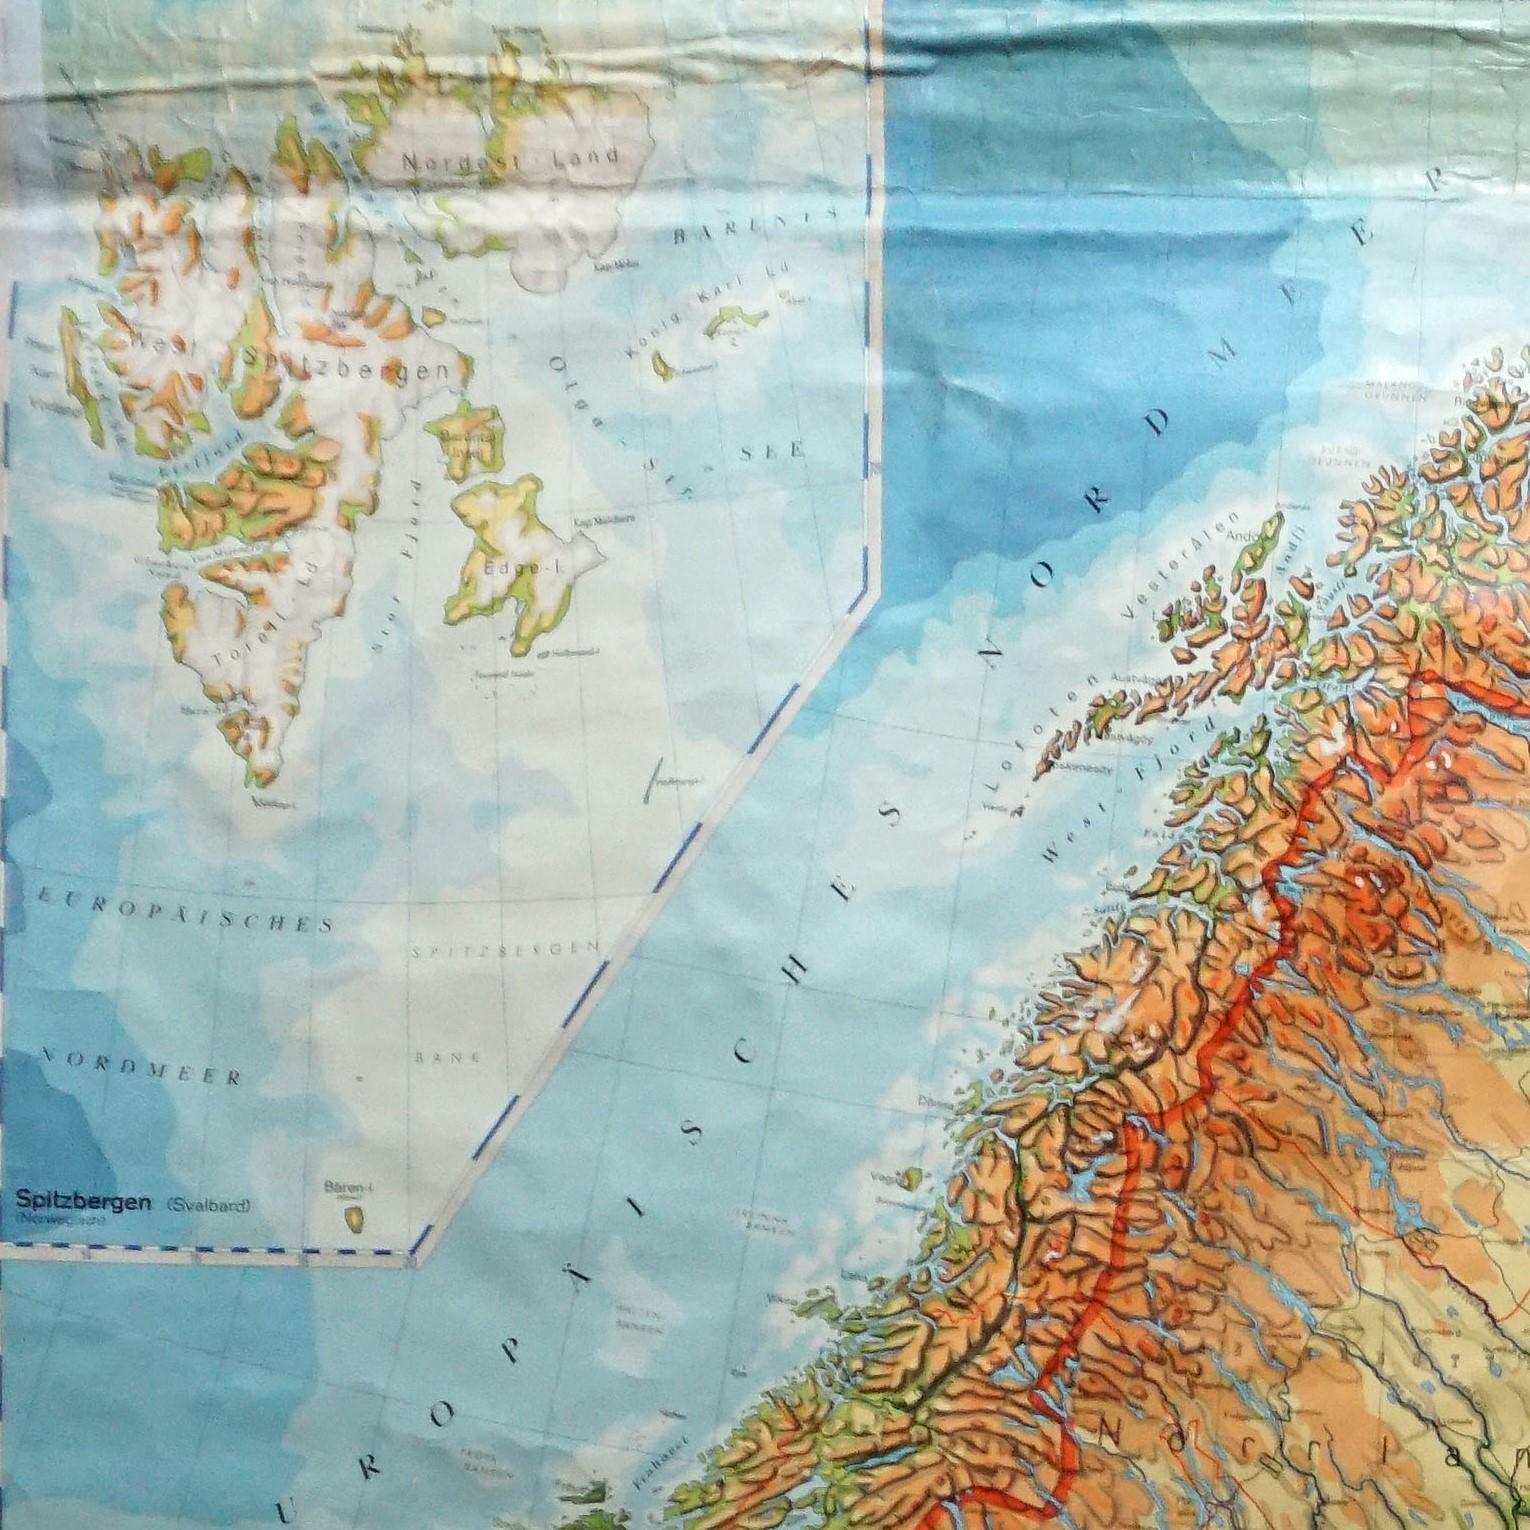 A great impressive cottagecore map illustrating Scandinavia (Norway, Sweden, Finland, Denmark and bordering Baltic Sea countries). Colorful print on paper reinforced with canvas.
Measurements:
Width 186.50 cm (73.43 inch)
Height 212 cm (83.46